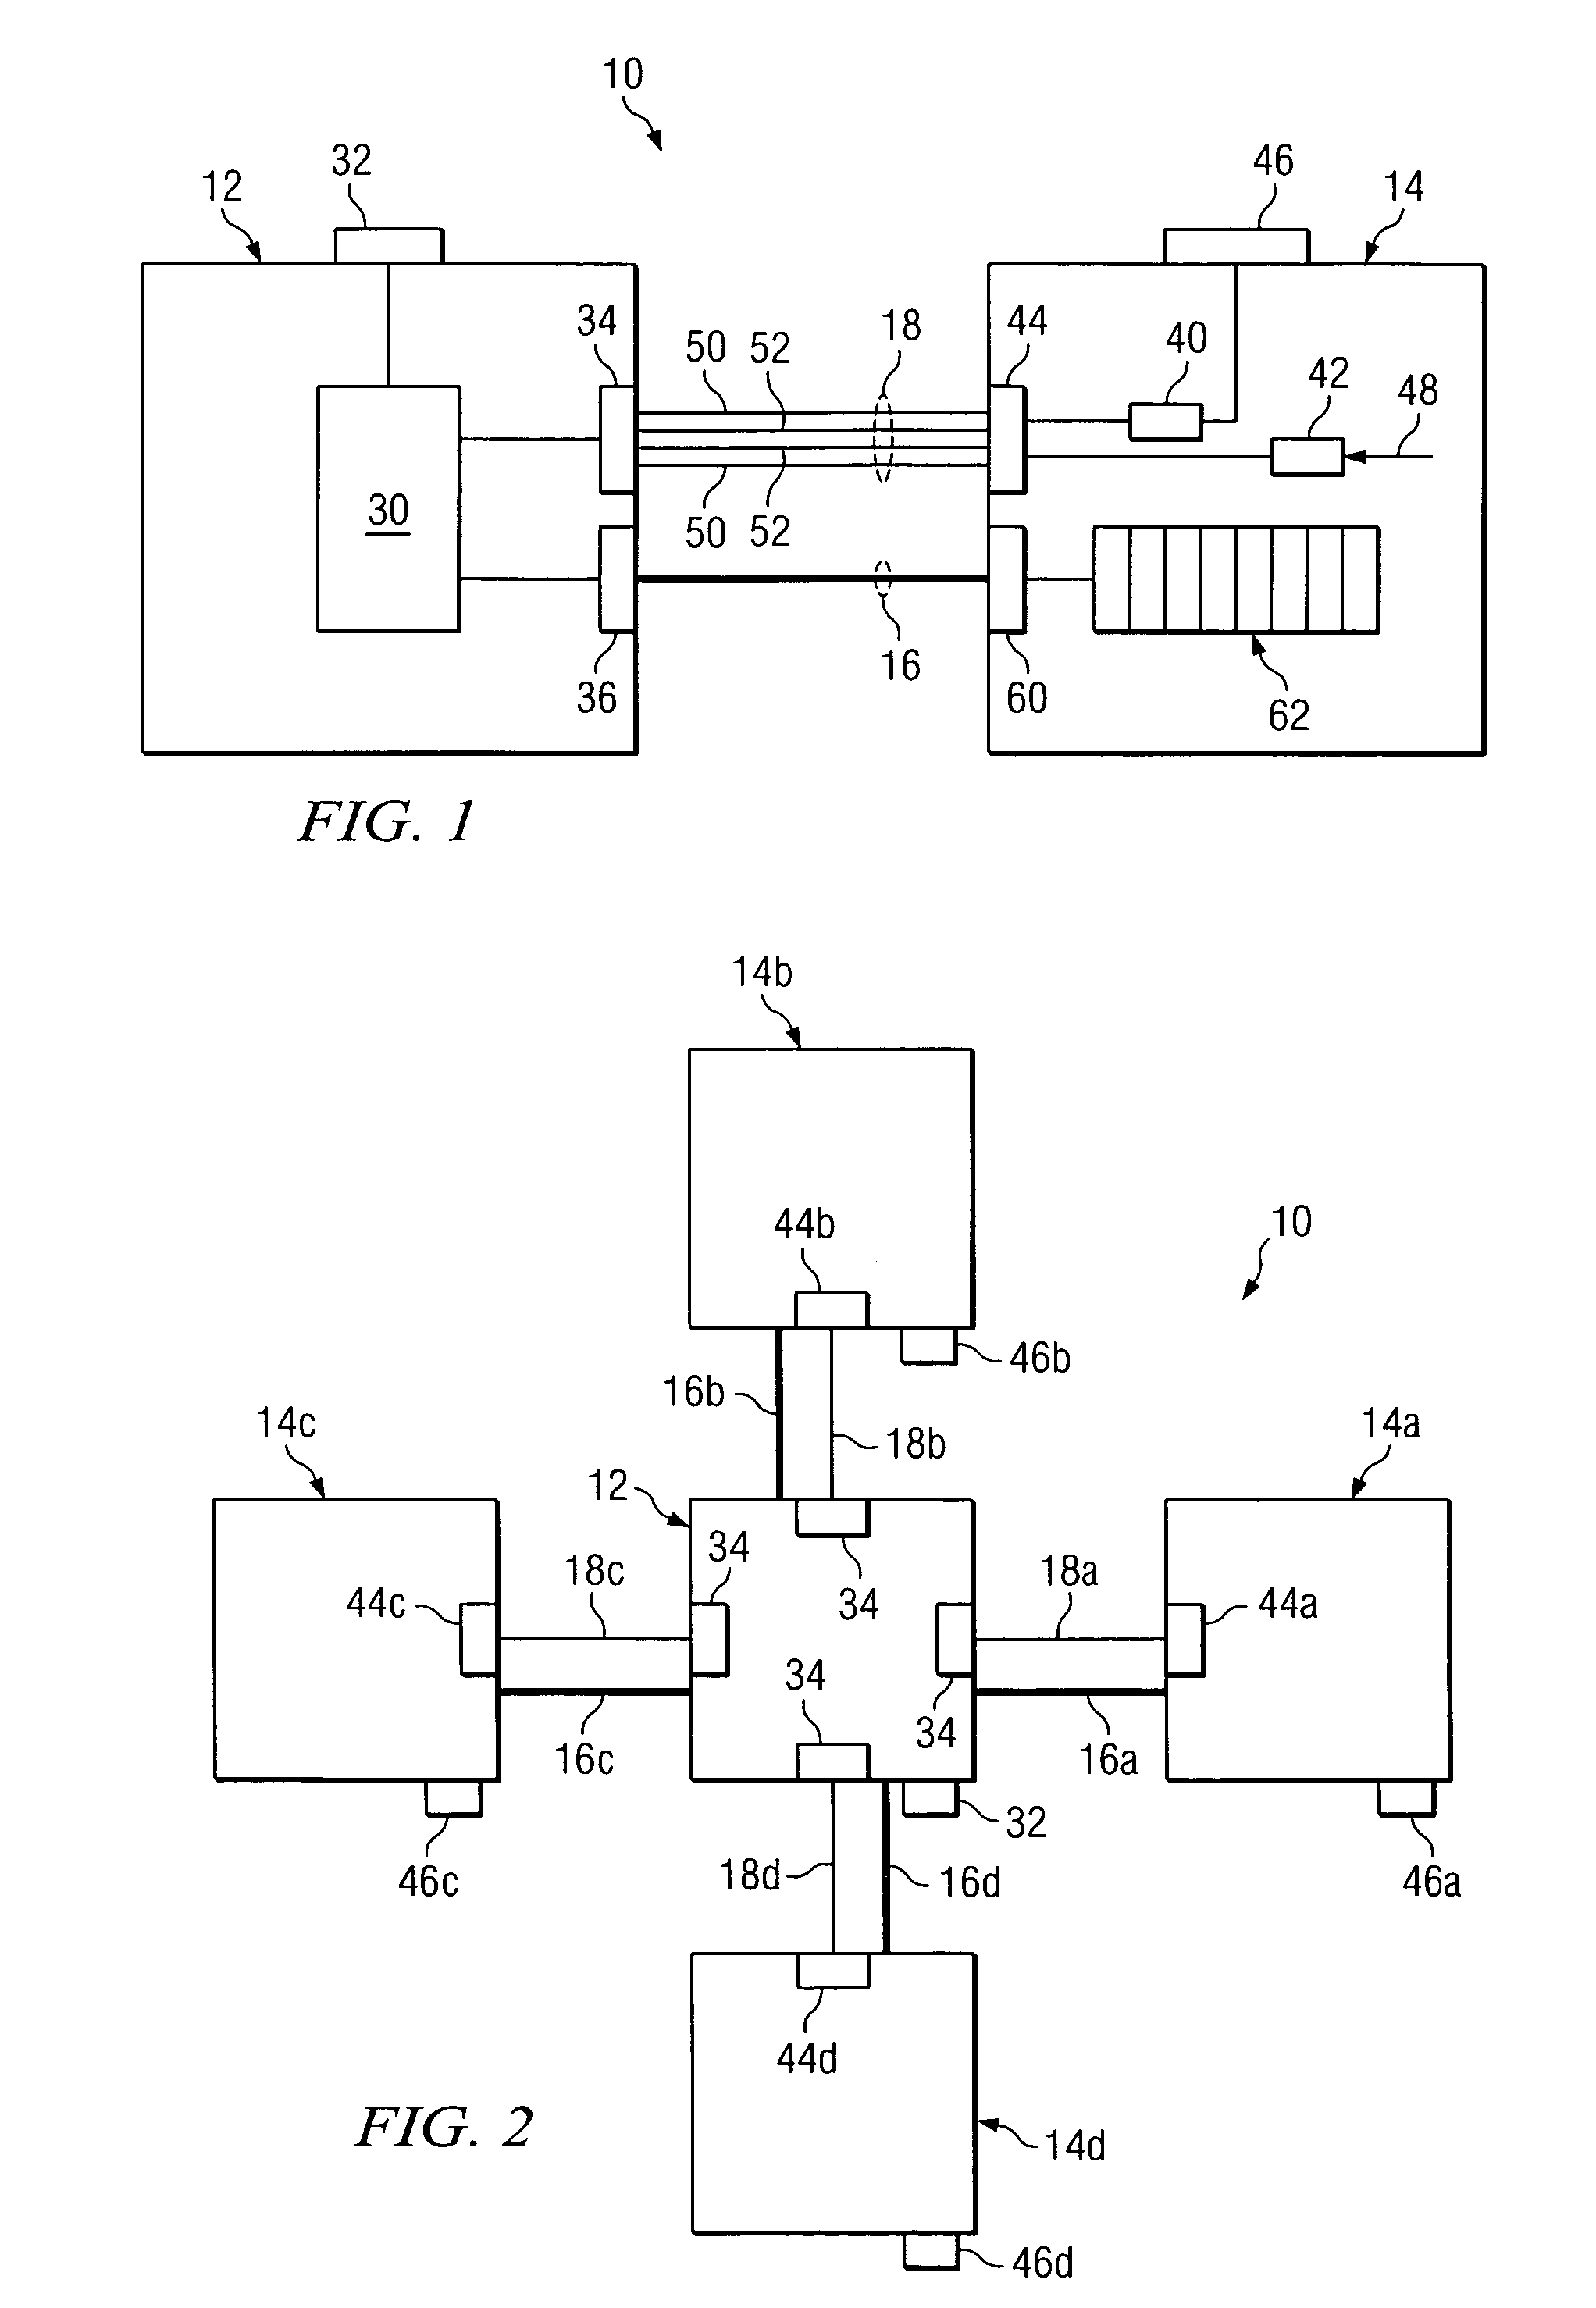 System and method for managing power control and data communication among devices